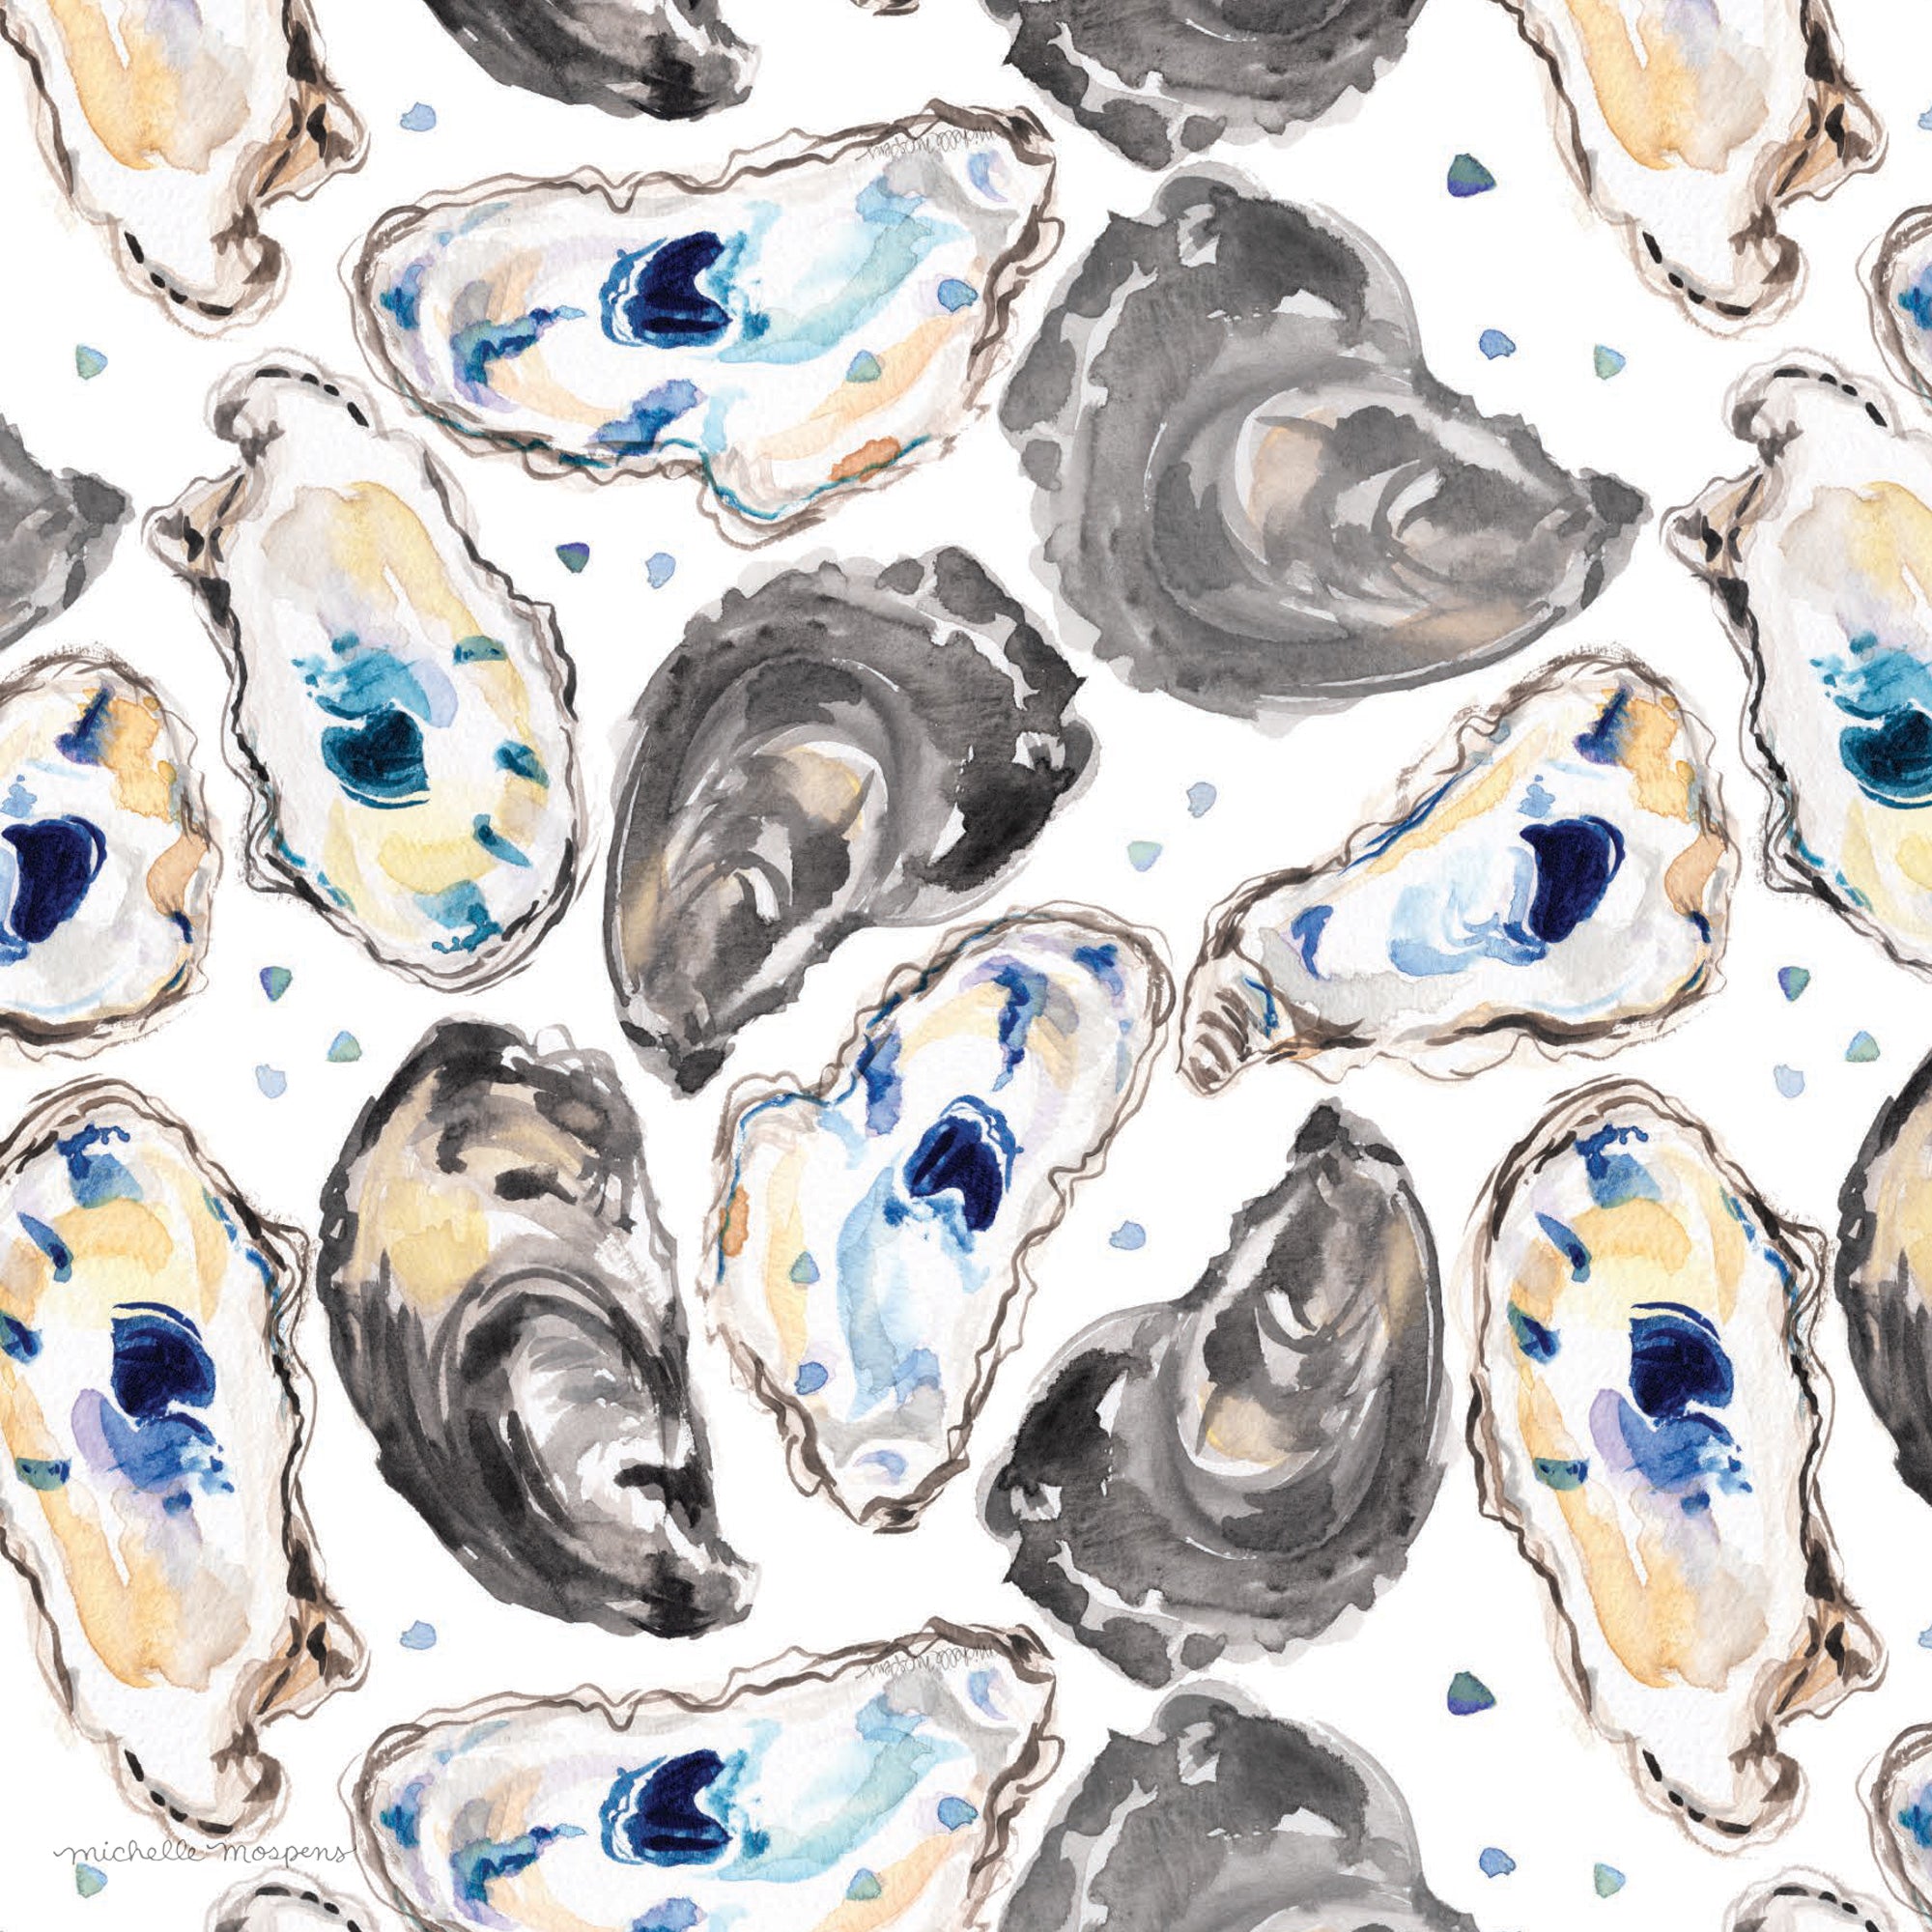 Watercolor Coastal Wrapping Paper by Michelle Mospens, Beach Oyster Shells Wrapping Paper, Holiday, Christmas, Birthday Gift Wrap